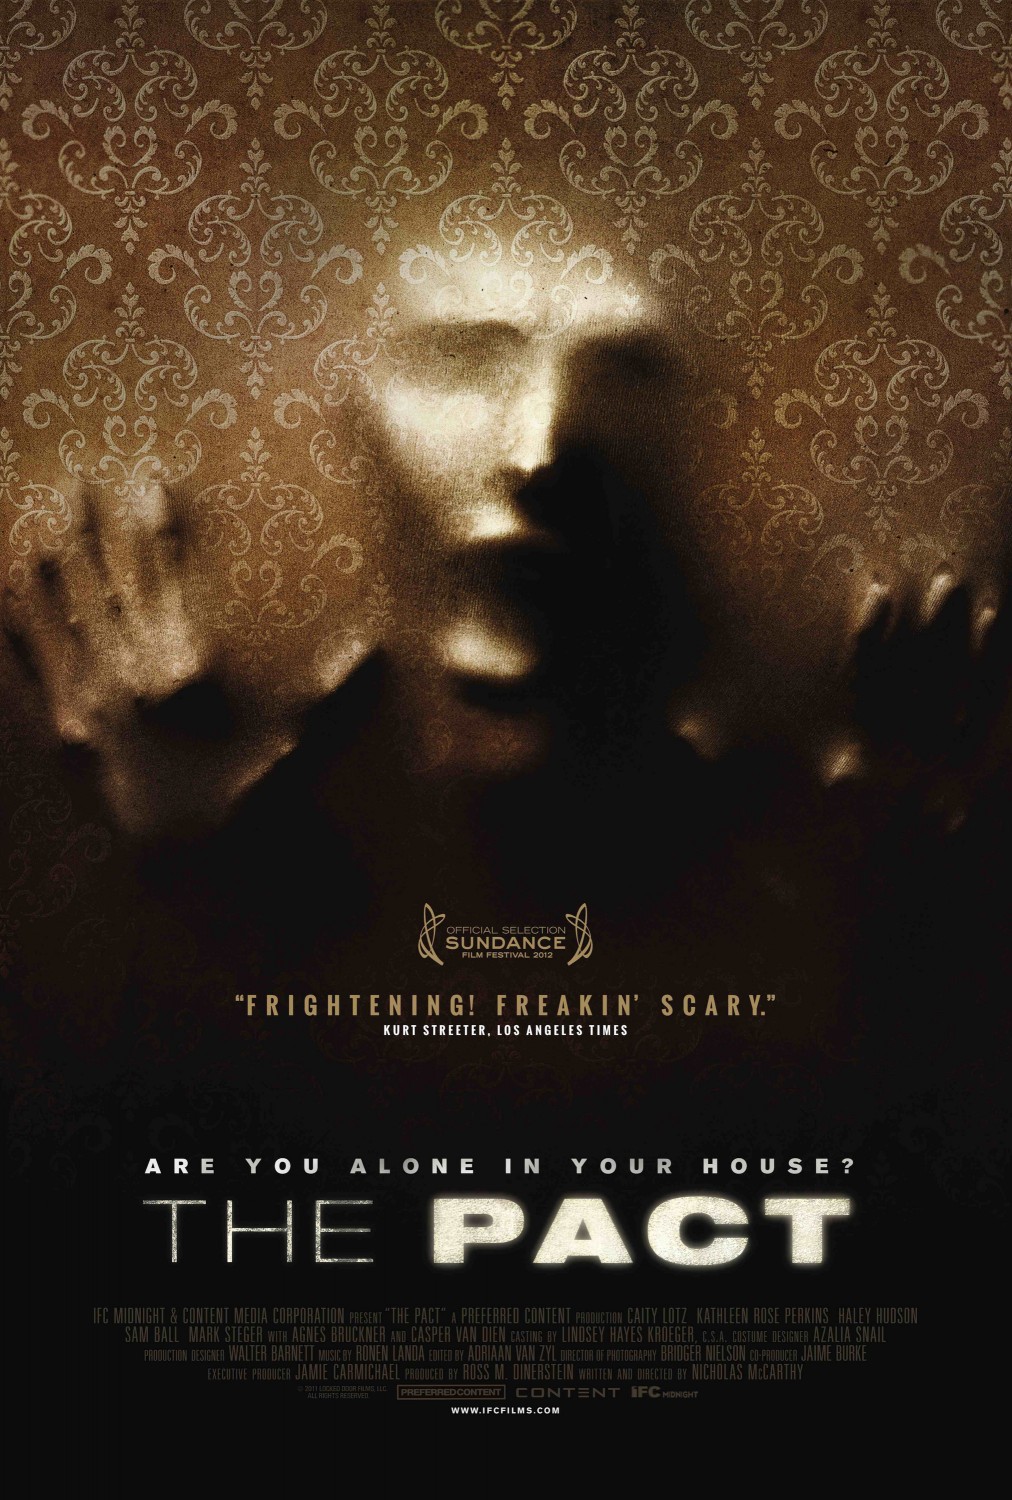 The Pact Poster.jpg